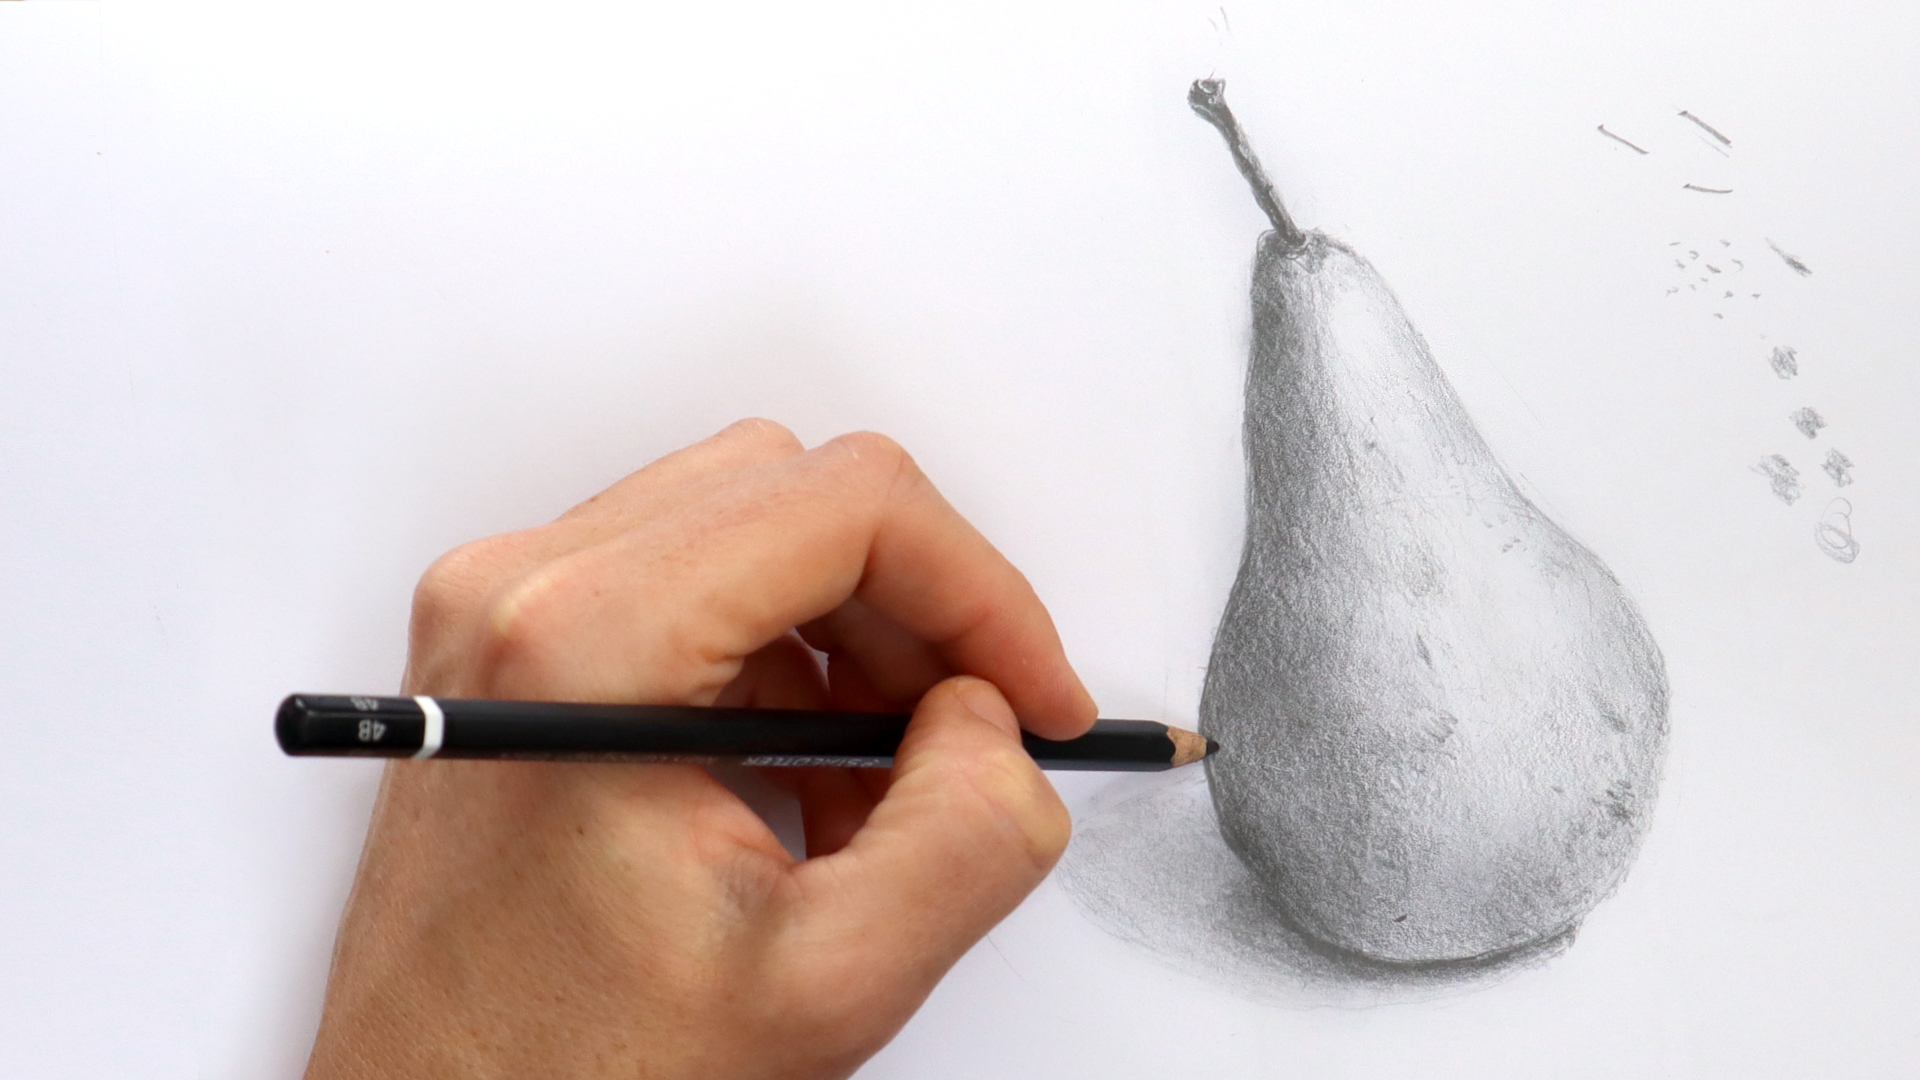 image showing a hand holding a pencil and sketching a pear